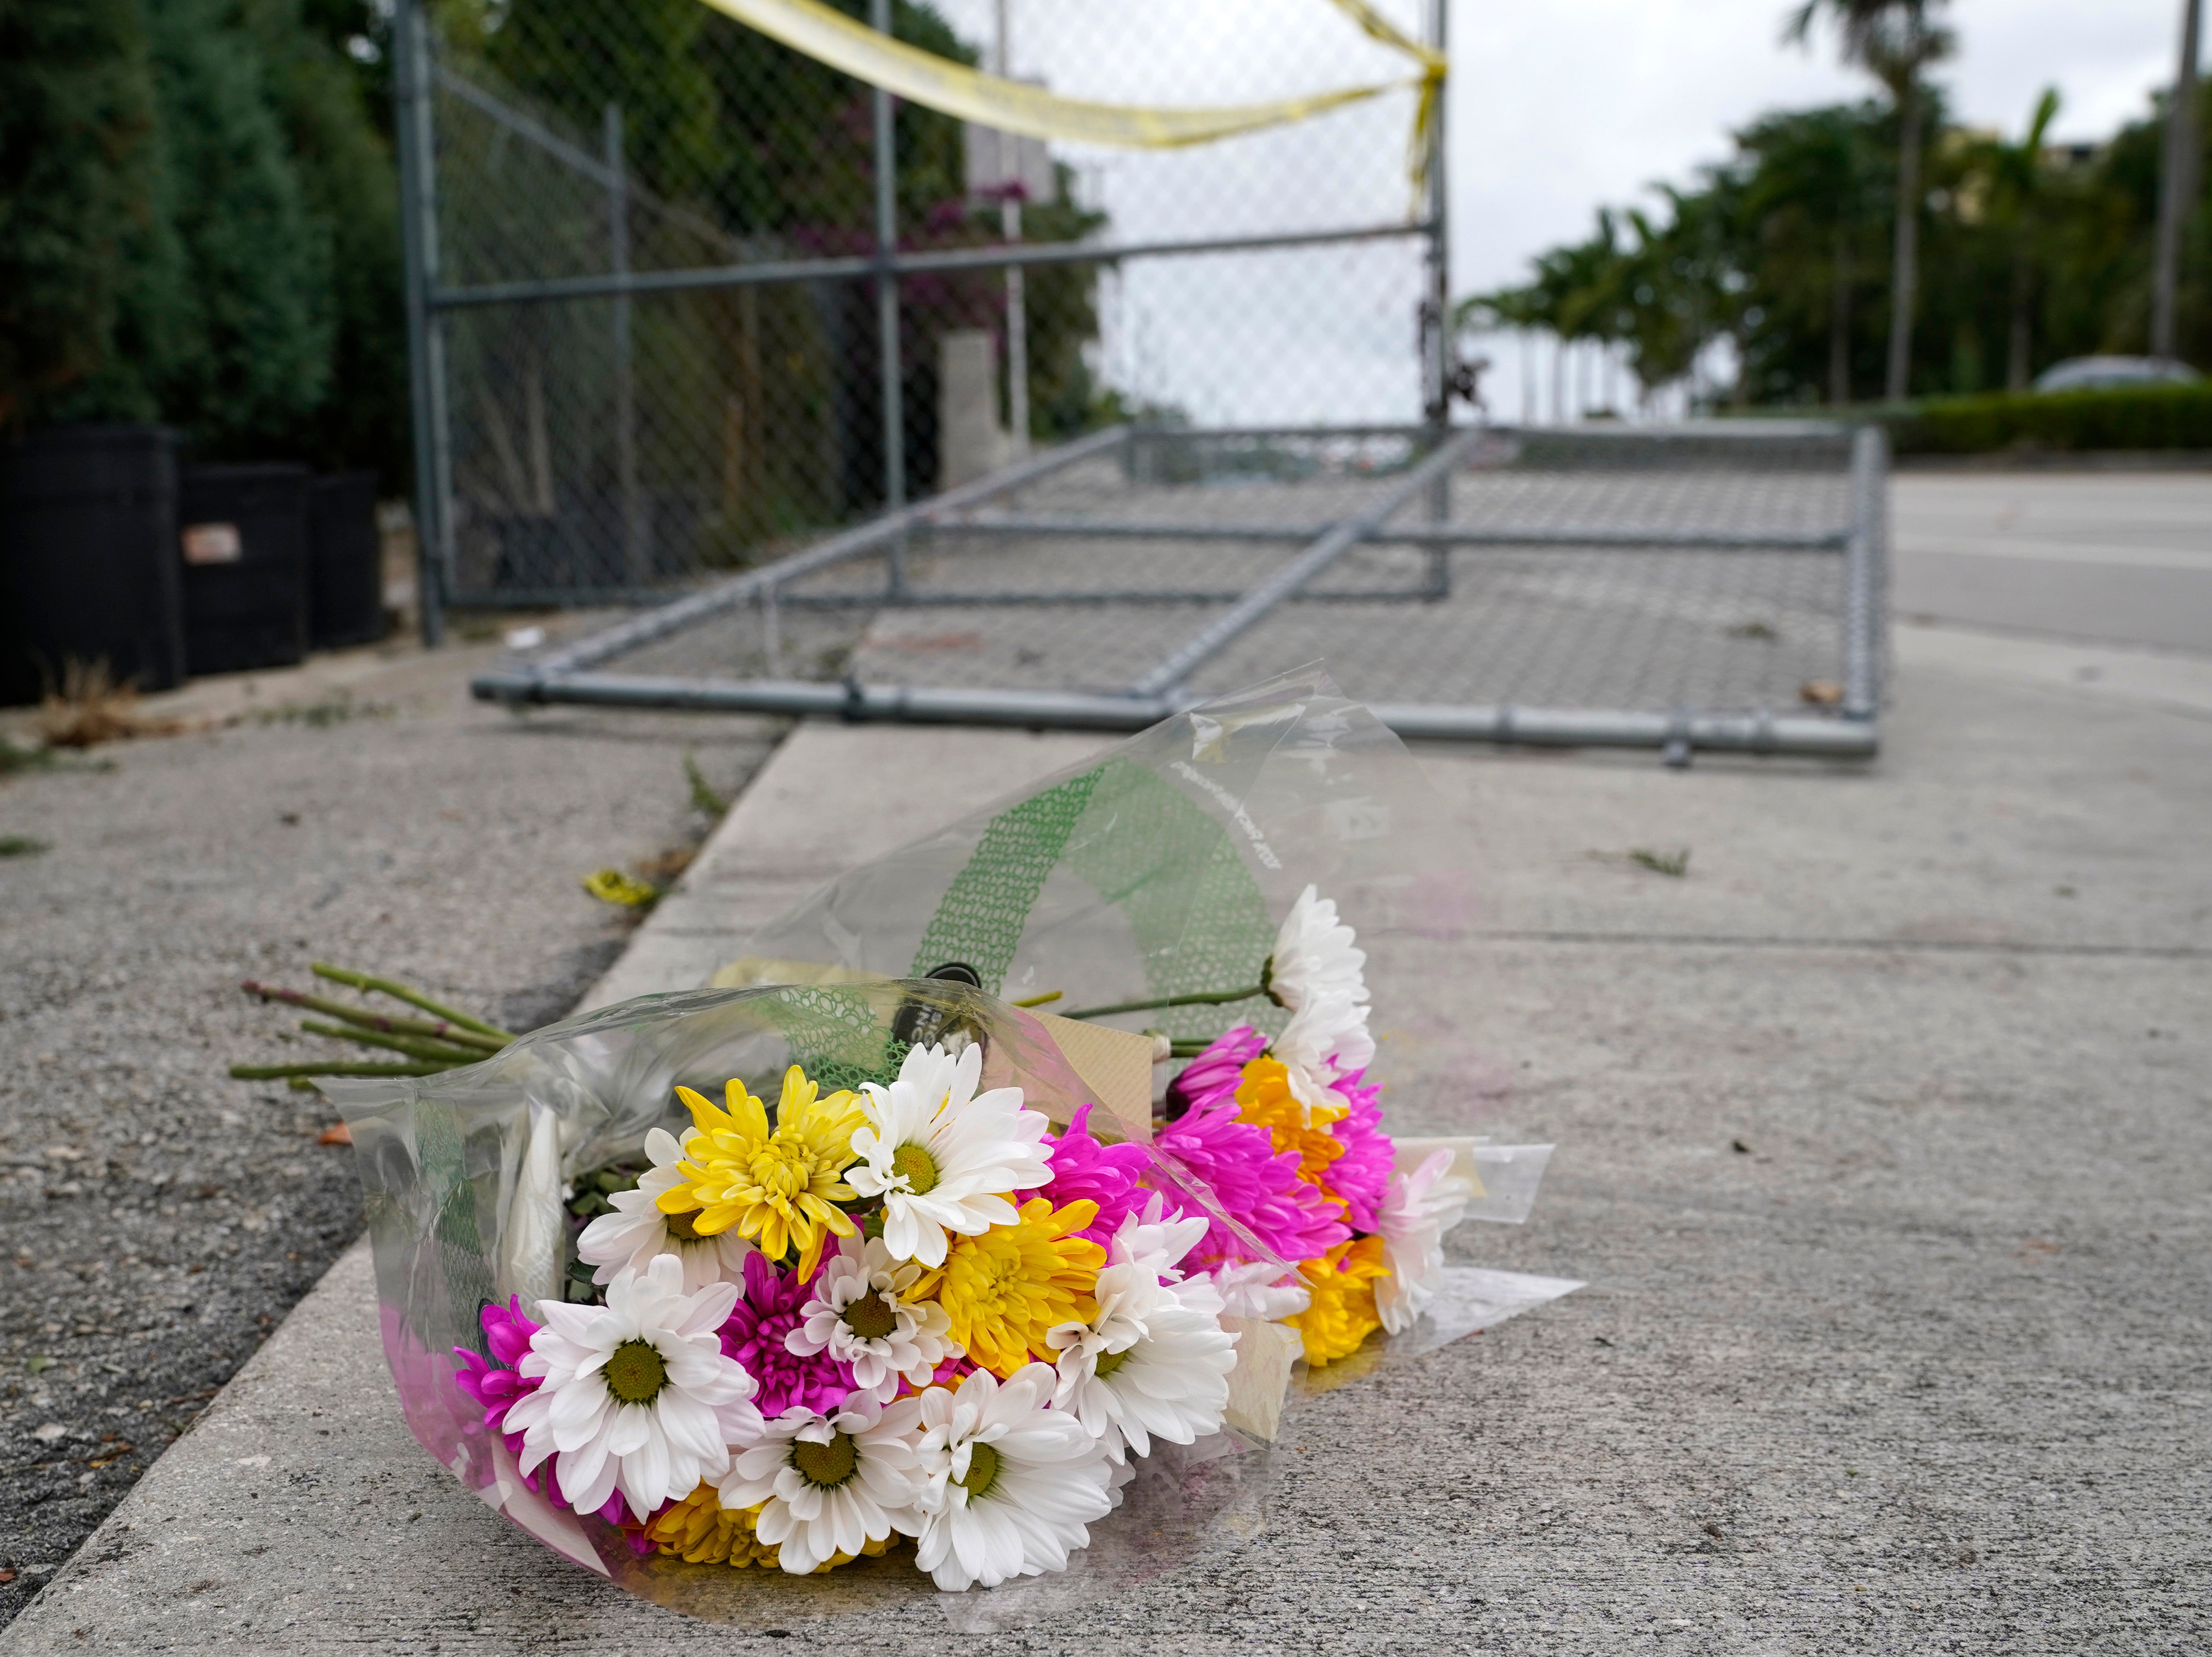 Flowers lie at the scene where a driver slammed into spectators at the start of a Pride parade Saturday evening, killing one man and seriously injuring another, Sunday 20 June 2021